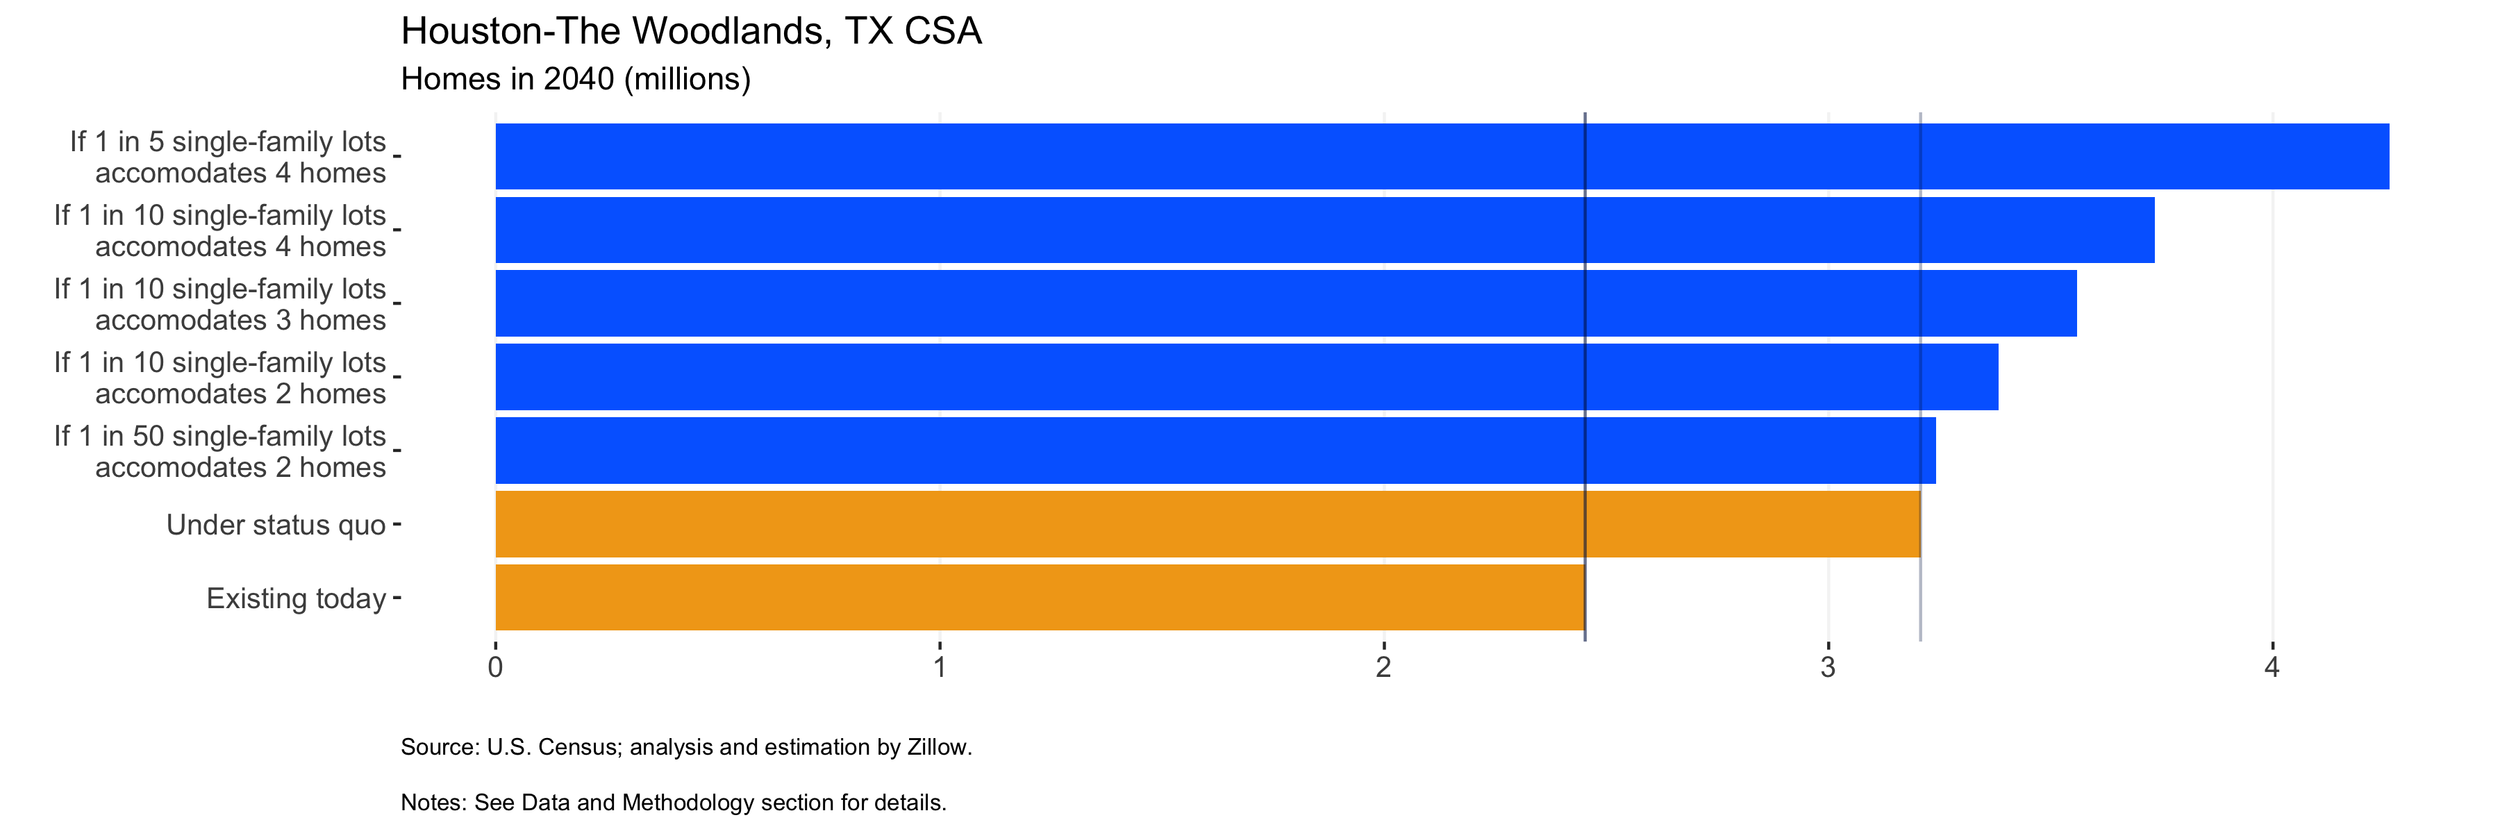 Chart_2_288_Houston-The Woodlands, TX CSA.png